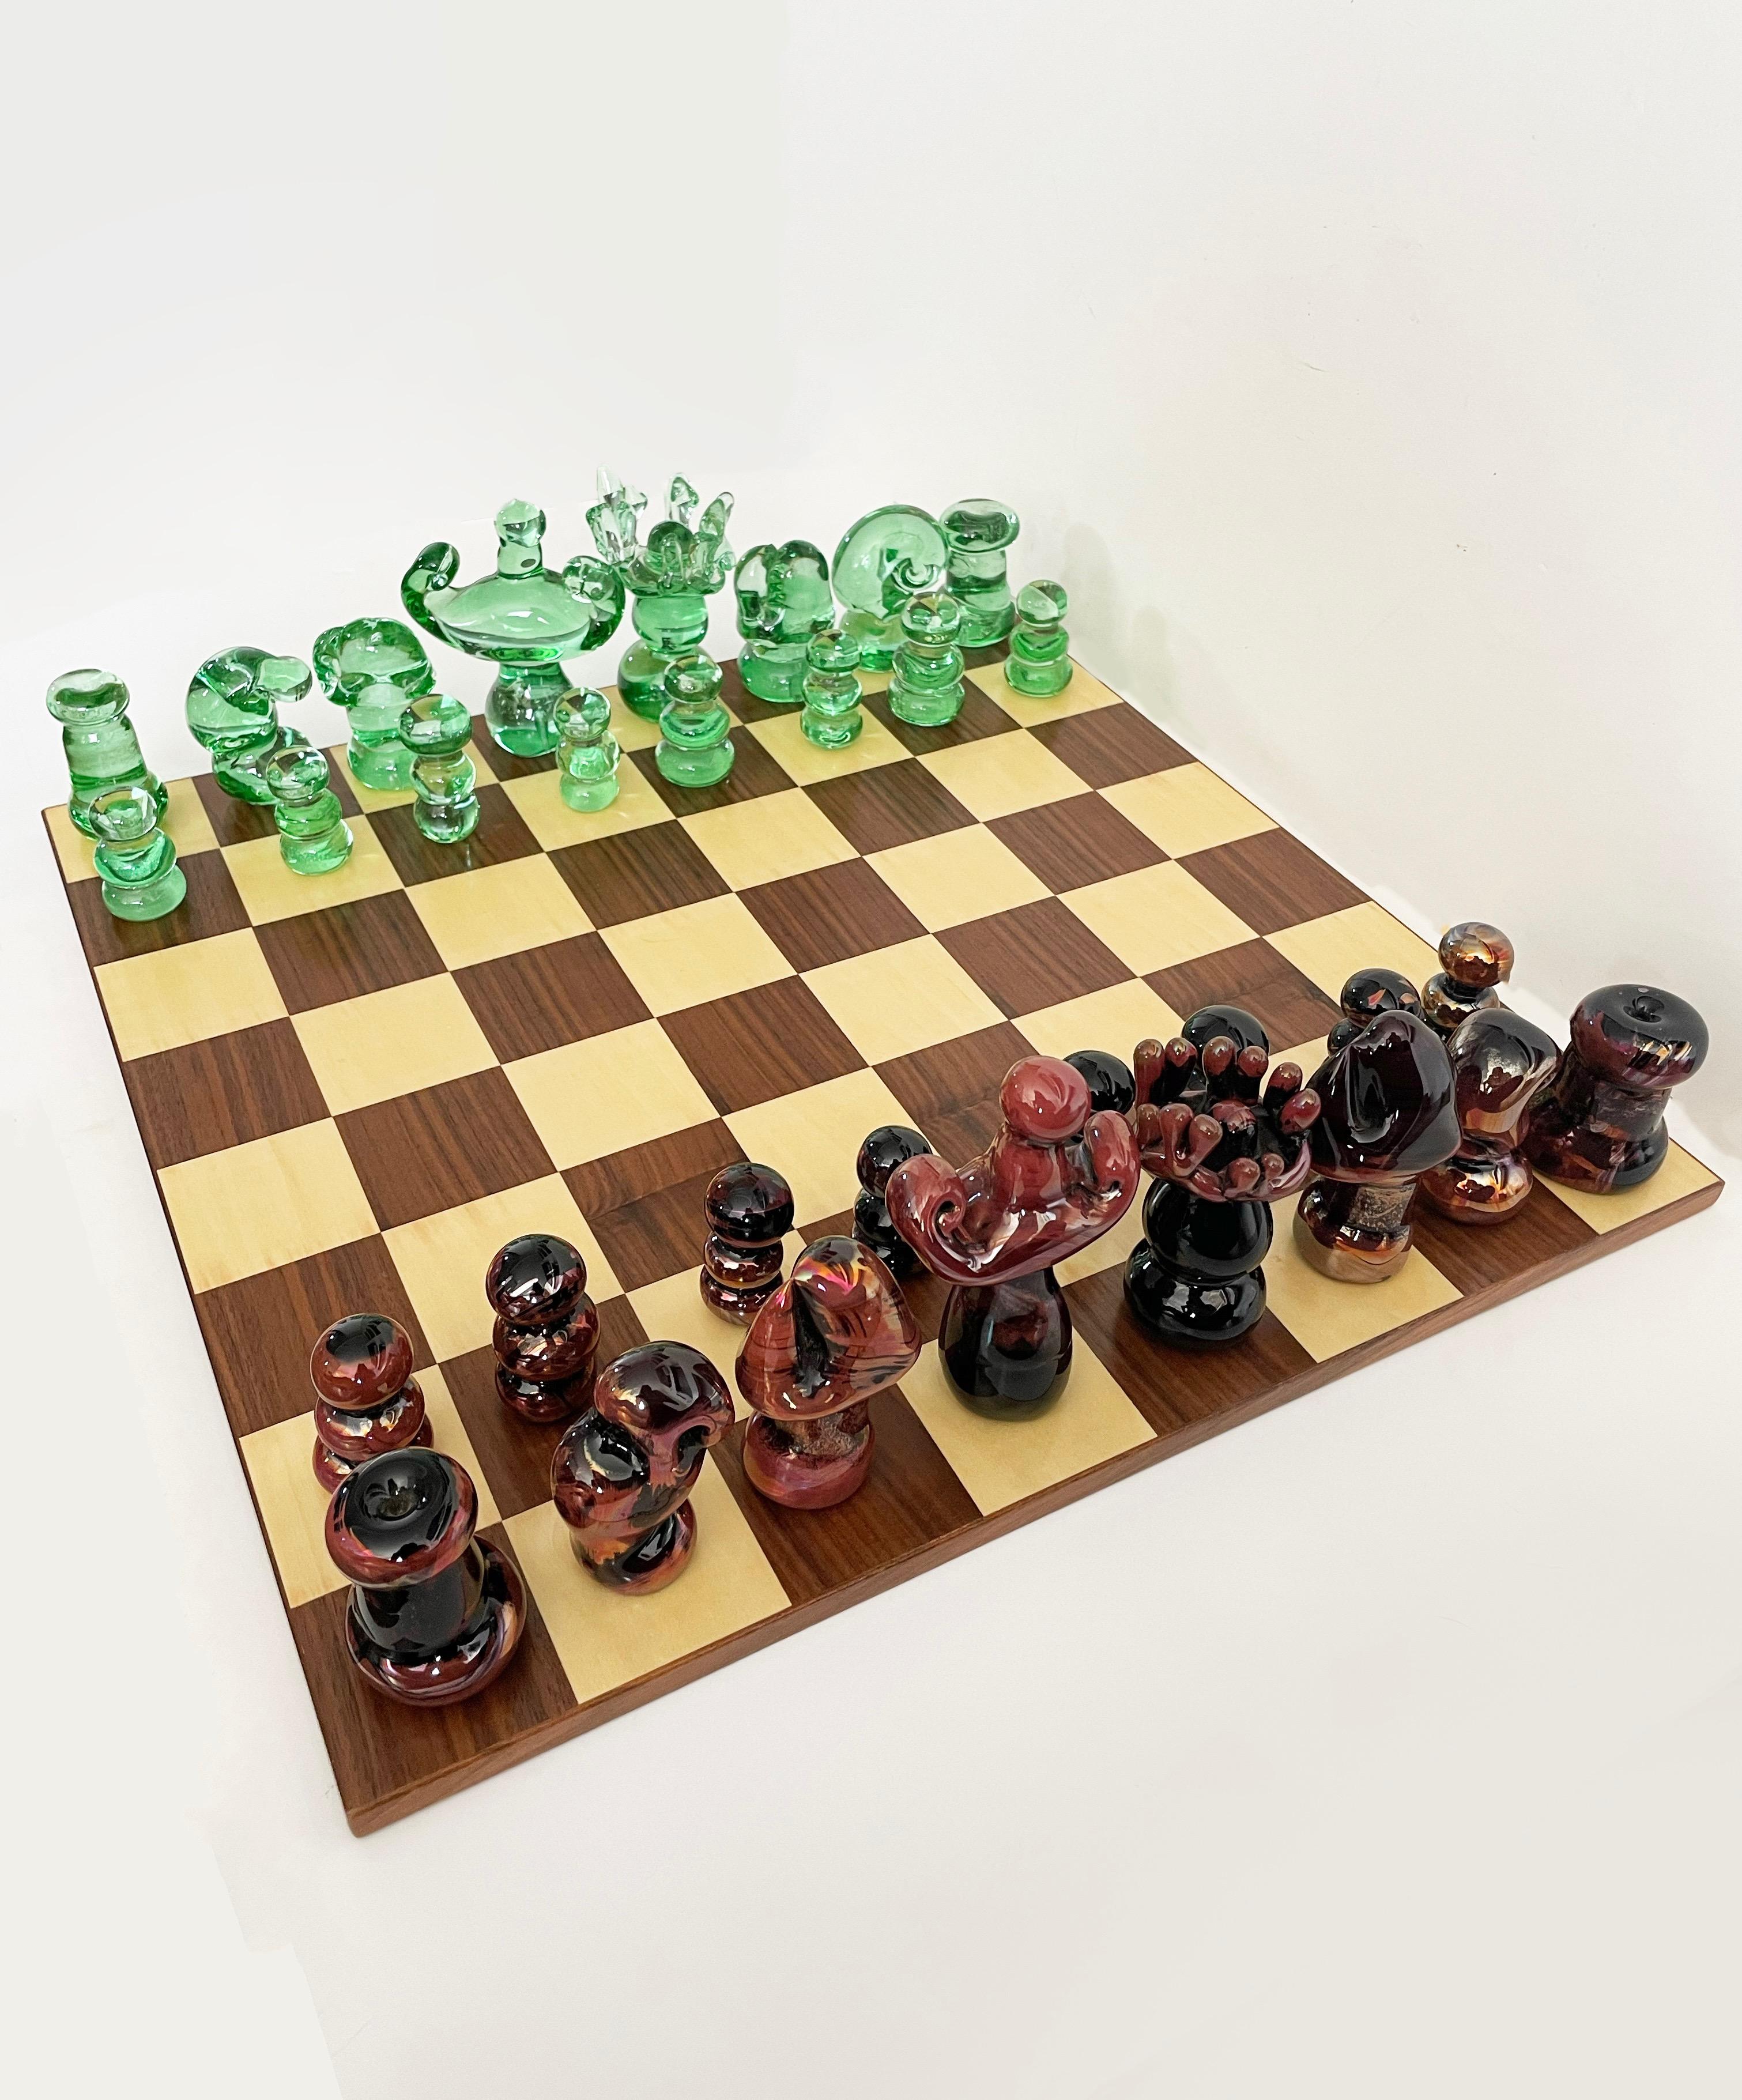 Stunning Murano glass chess set featuring juicy handblown pieces. No chips or cracks, purchased from a collector who bought in Italy ca. 1990. Wood board included.